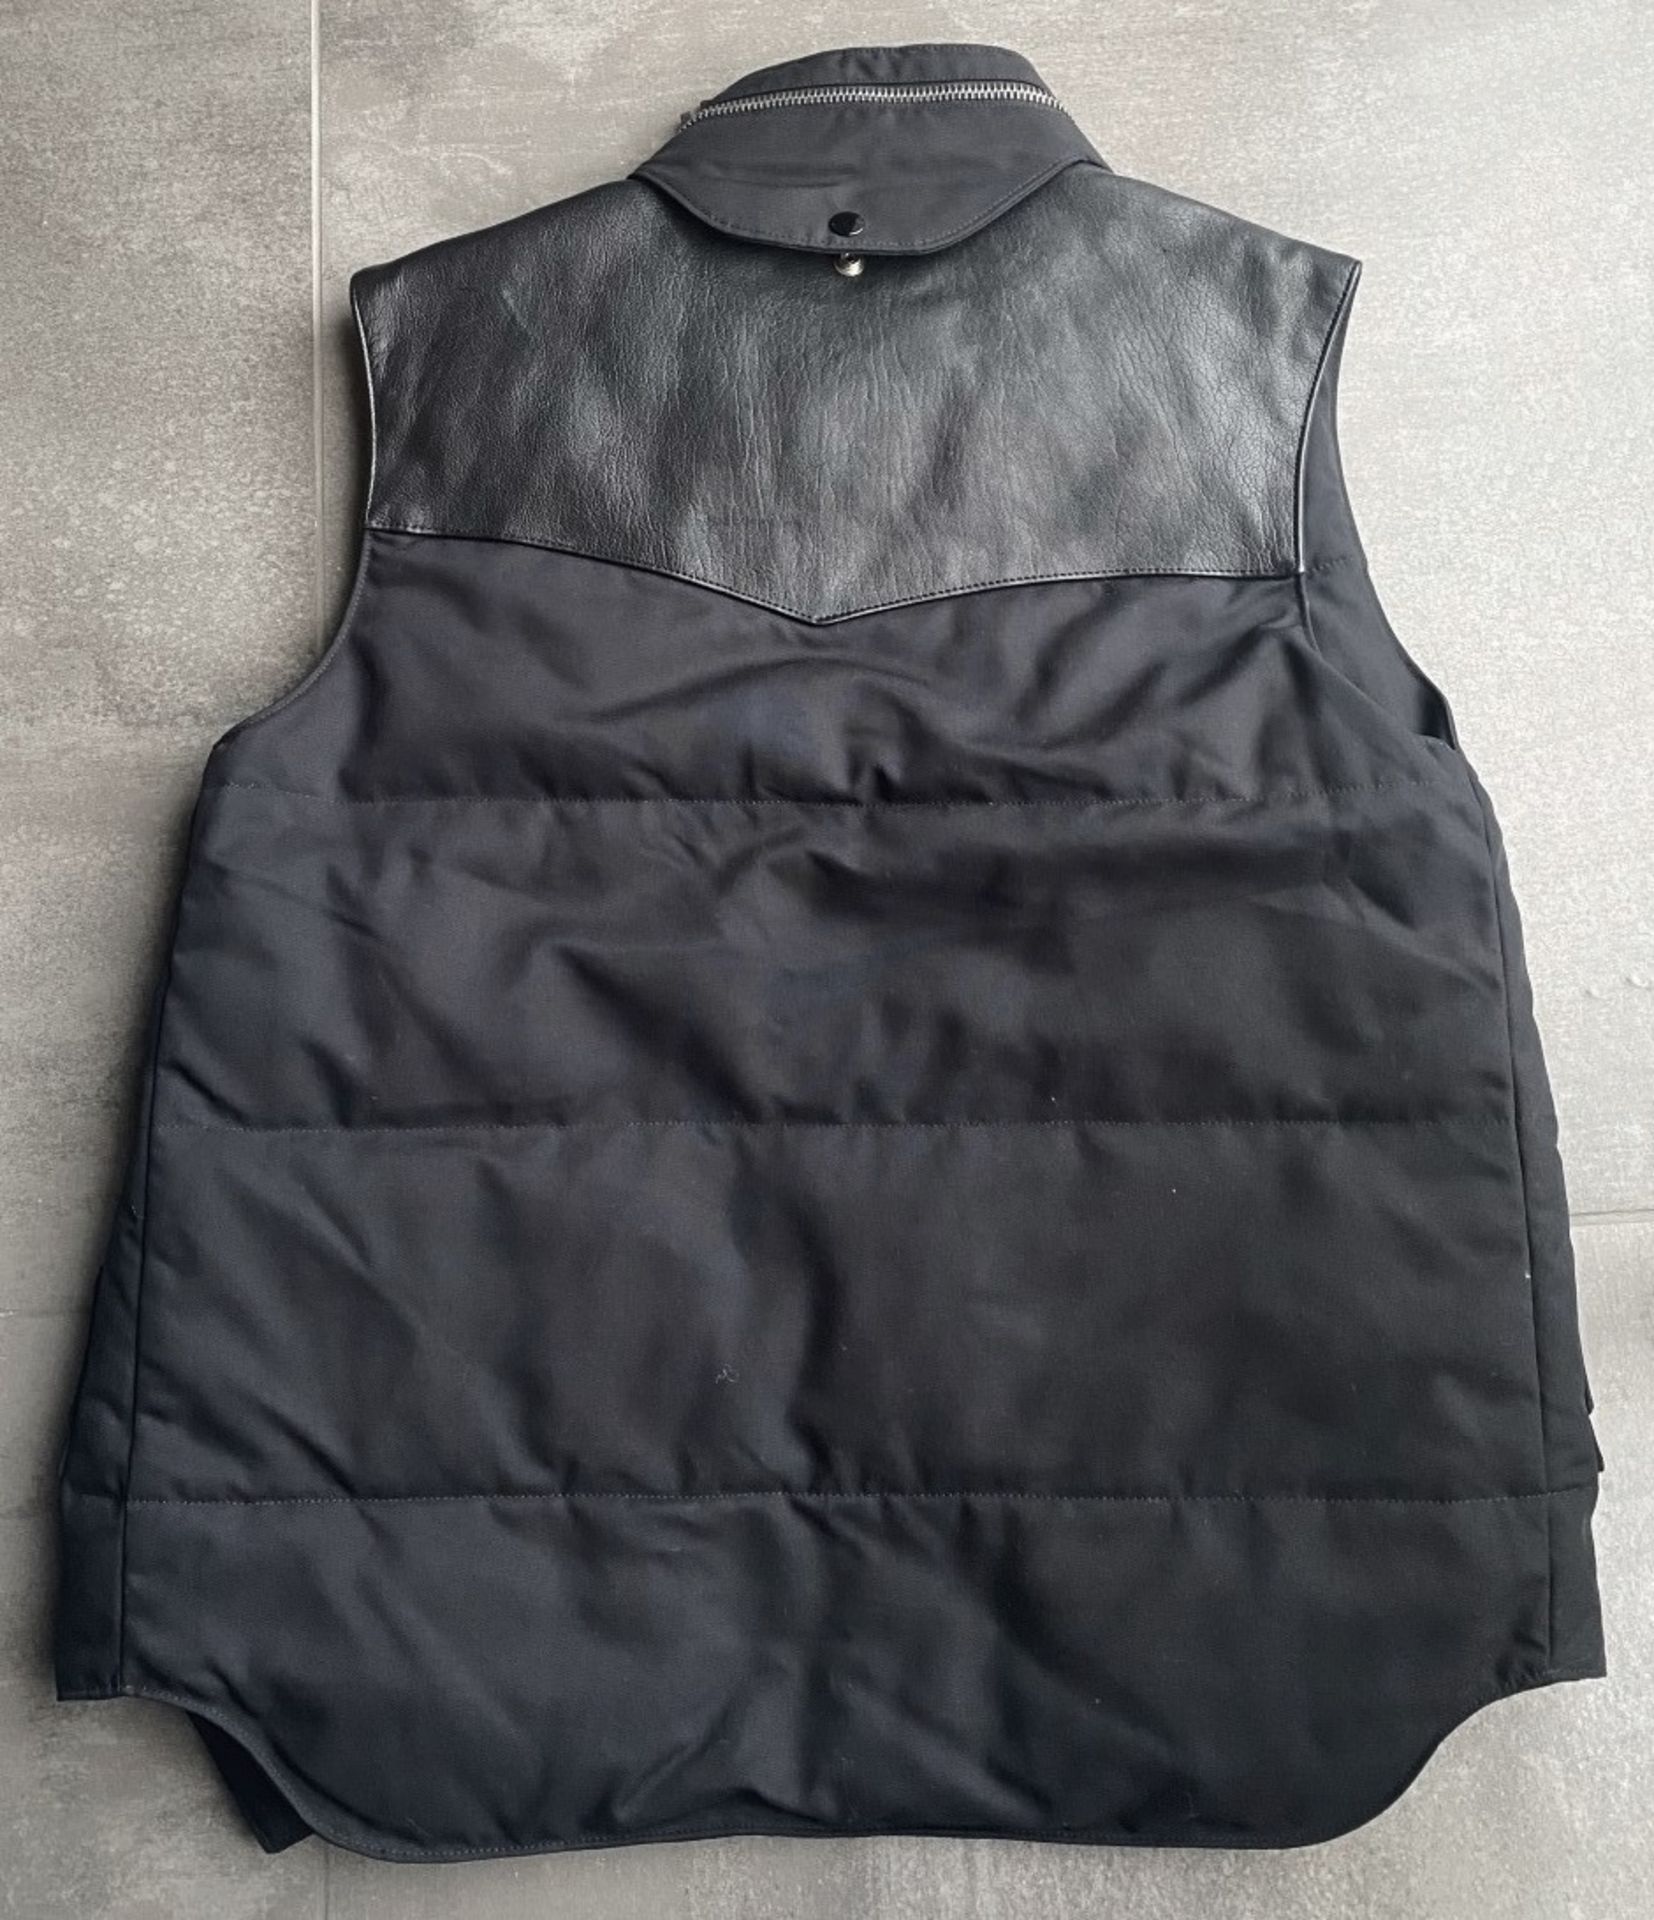 1 x Men's Genuine Yves Saint Laurant Gillet / Body Warmer In Black With Leather Panelling - Image 8 of 8